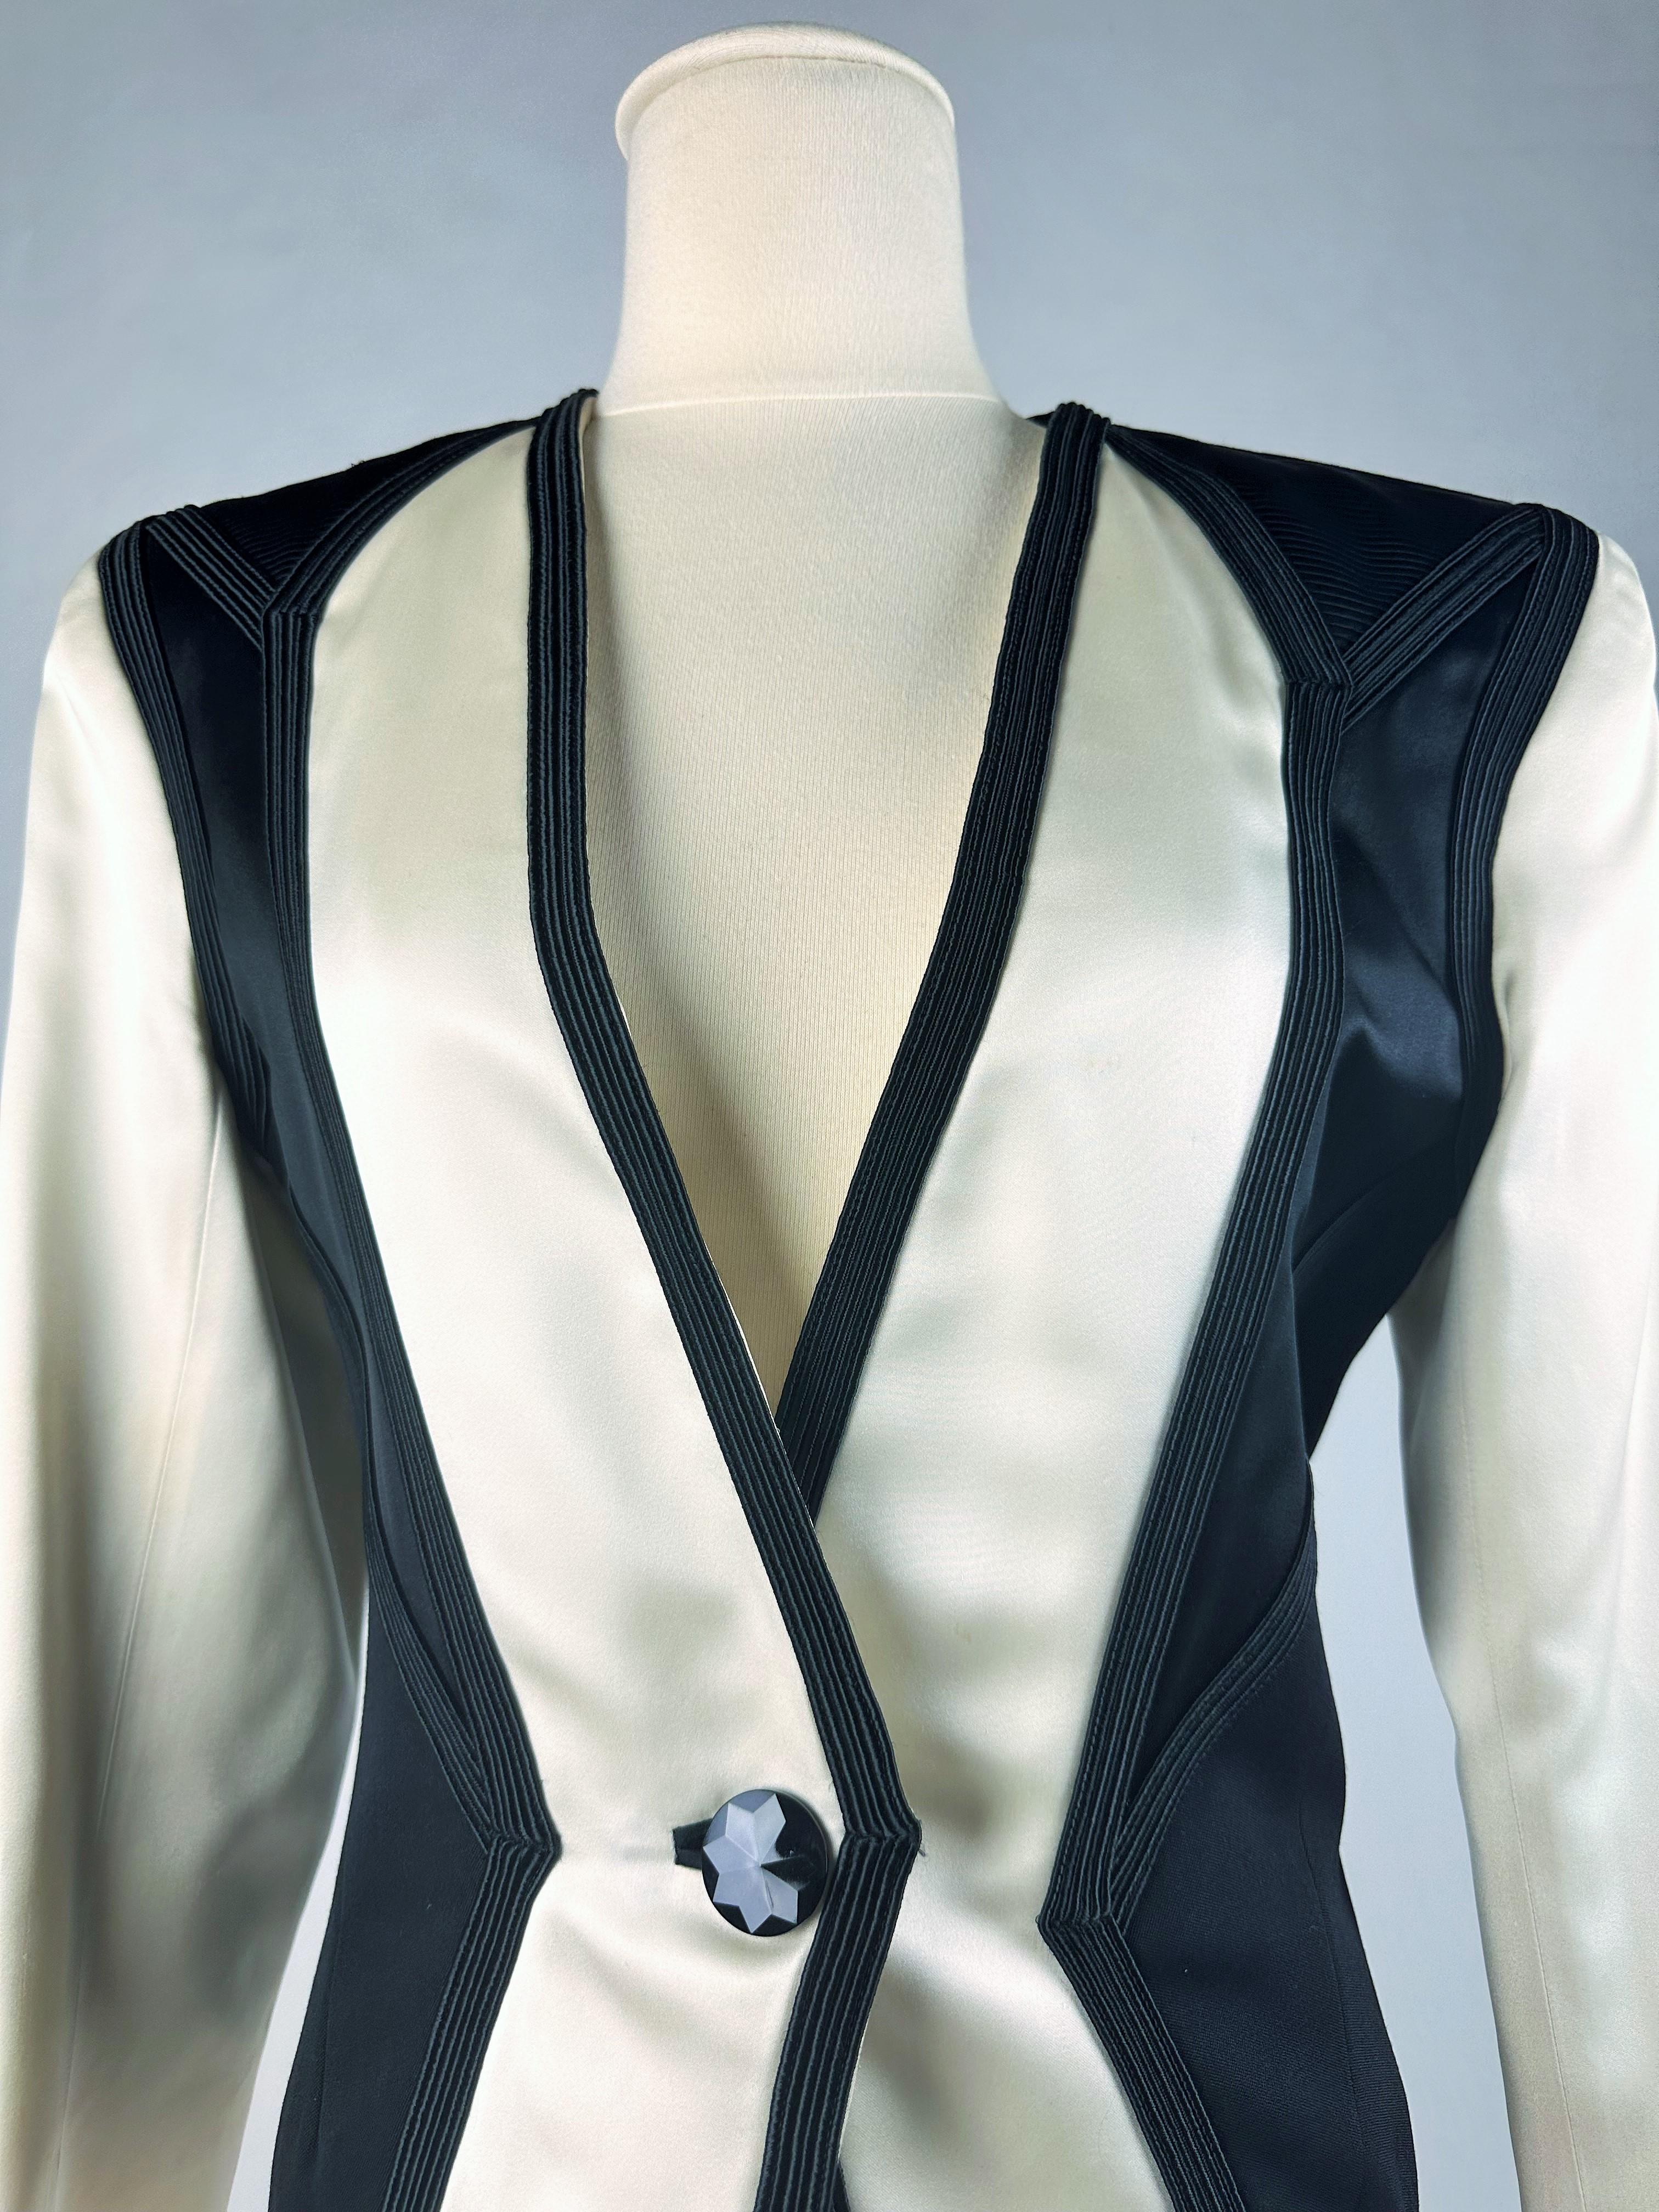 Women's An Yves Saint Laurent Rive Gauche Jacket inspired by Picasso Circa 1989